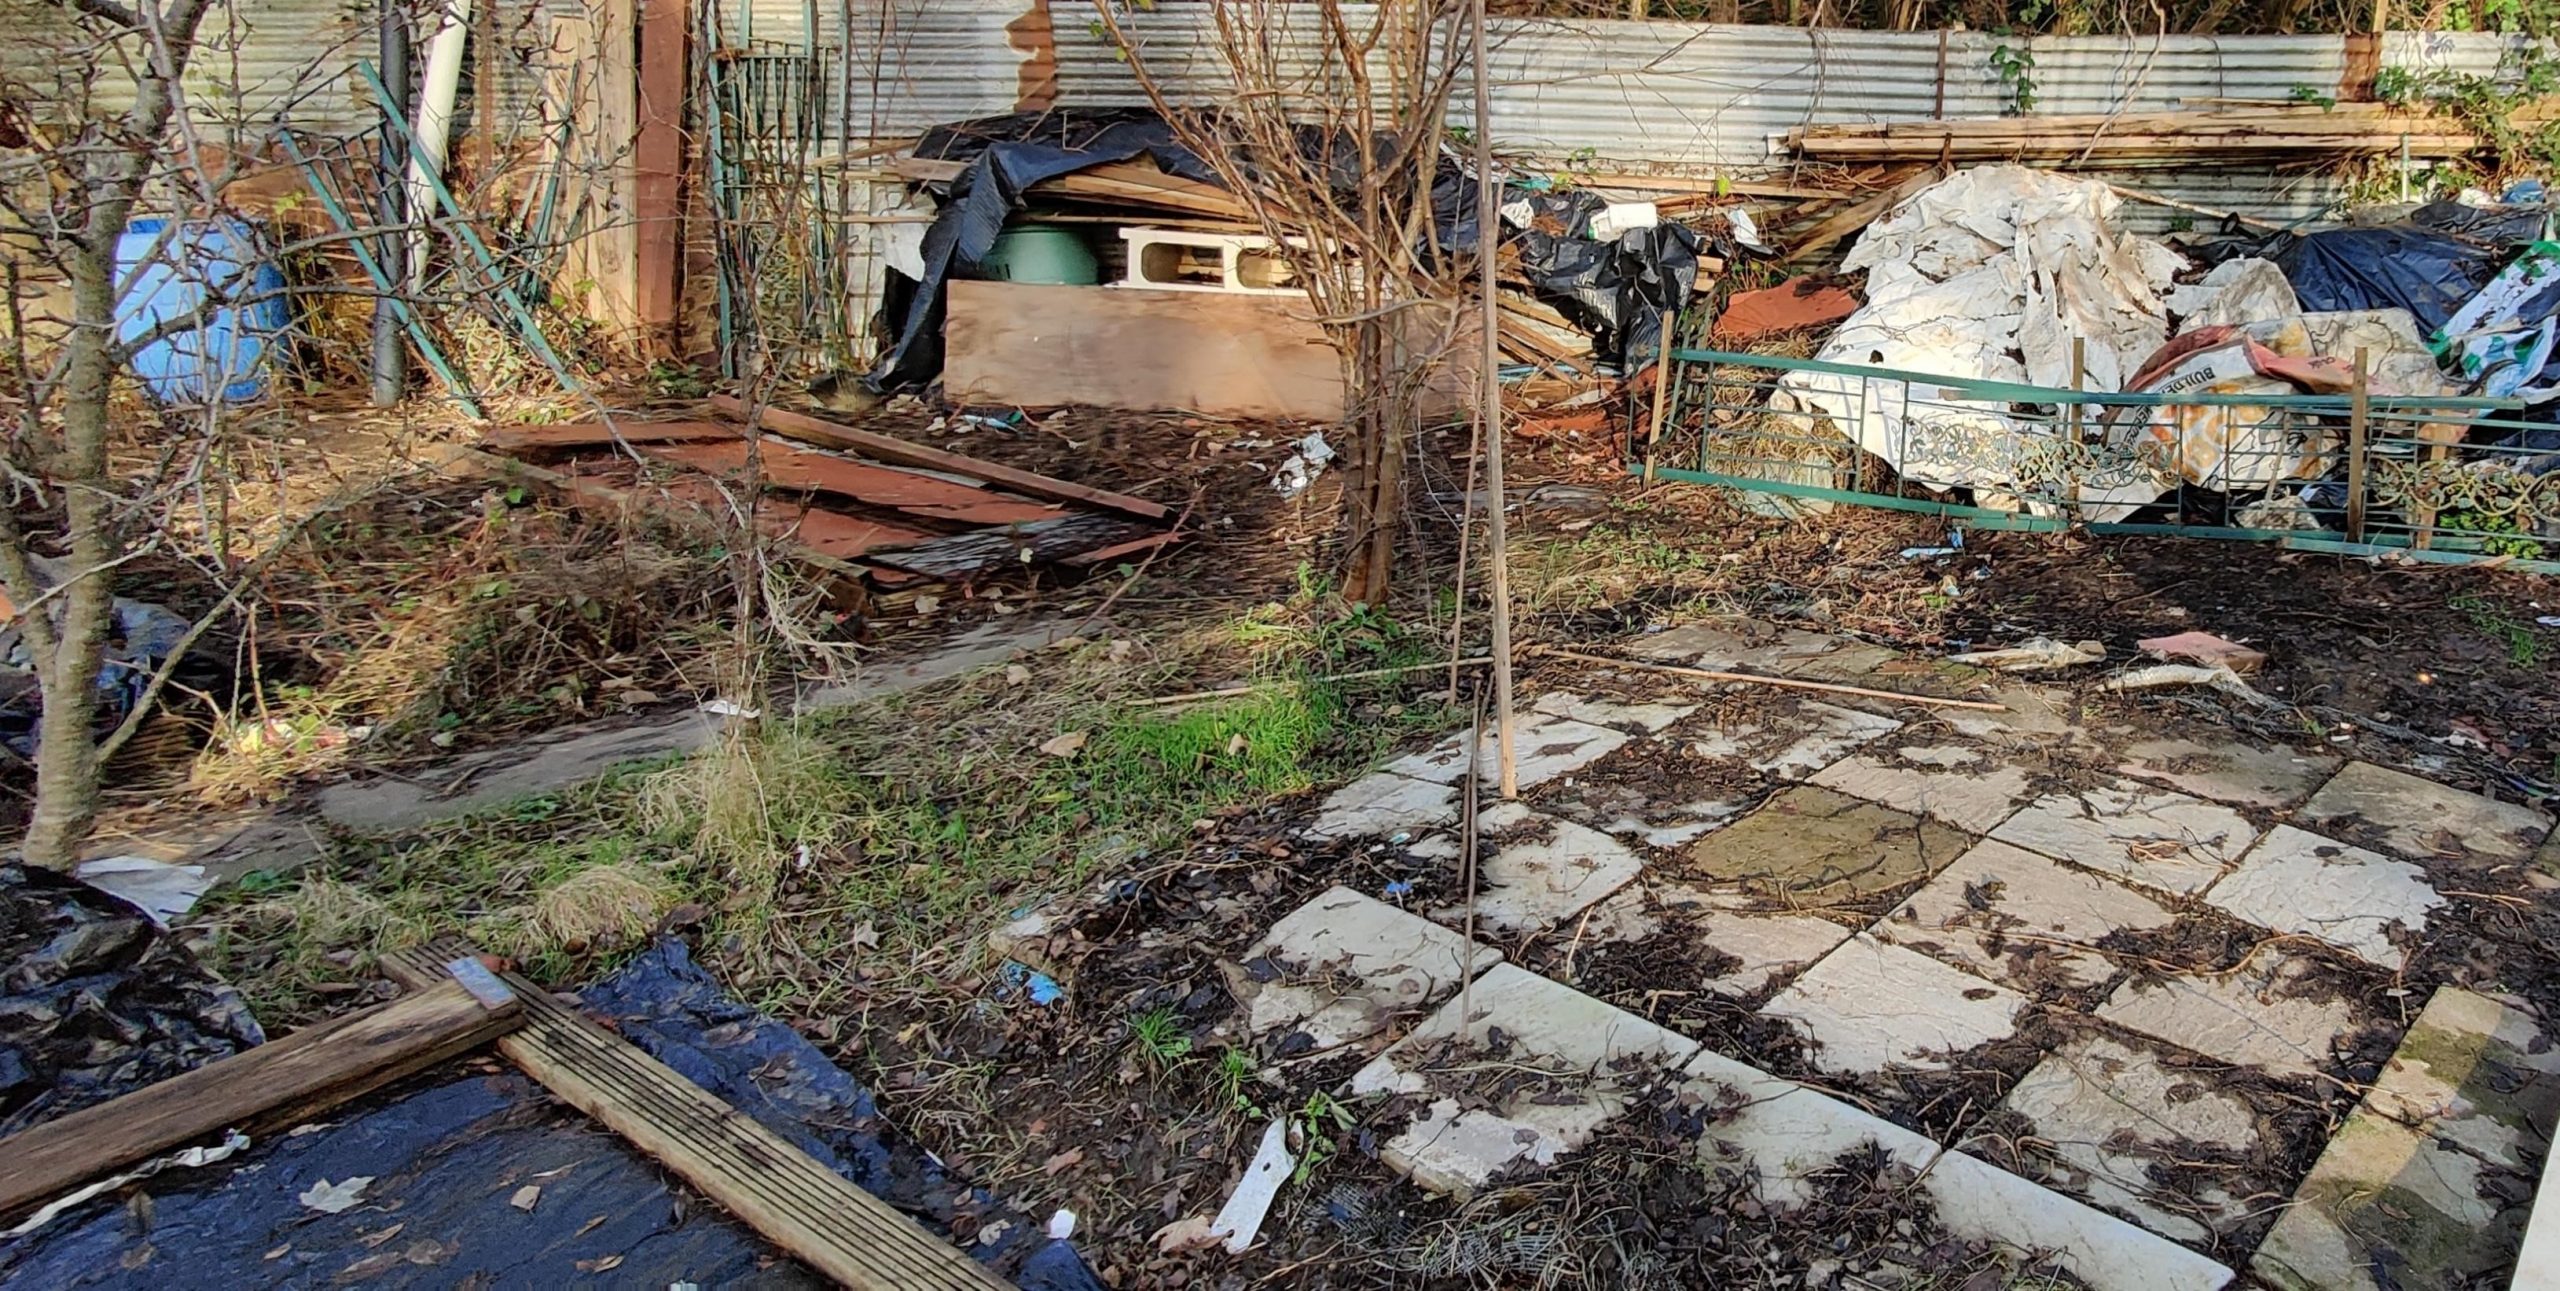 THE NATION'S UGLIEST GARDEN HAS BEEN REVEALED - Cardiff Times